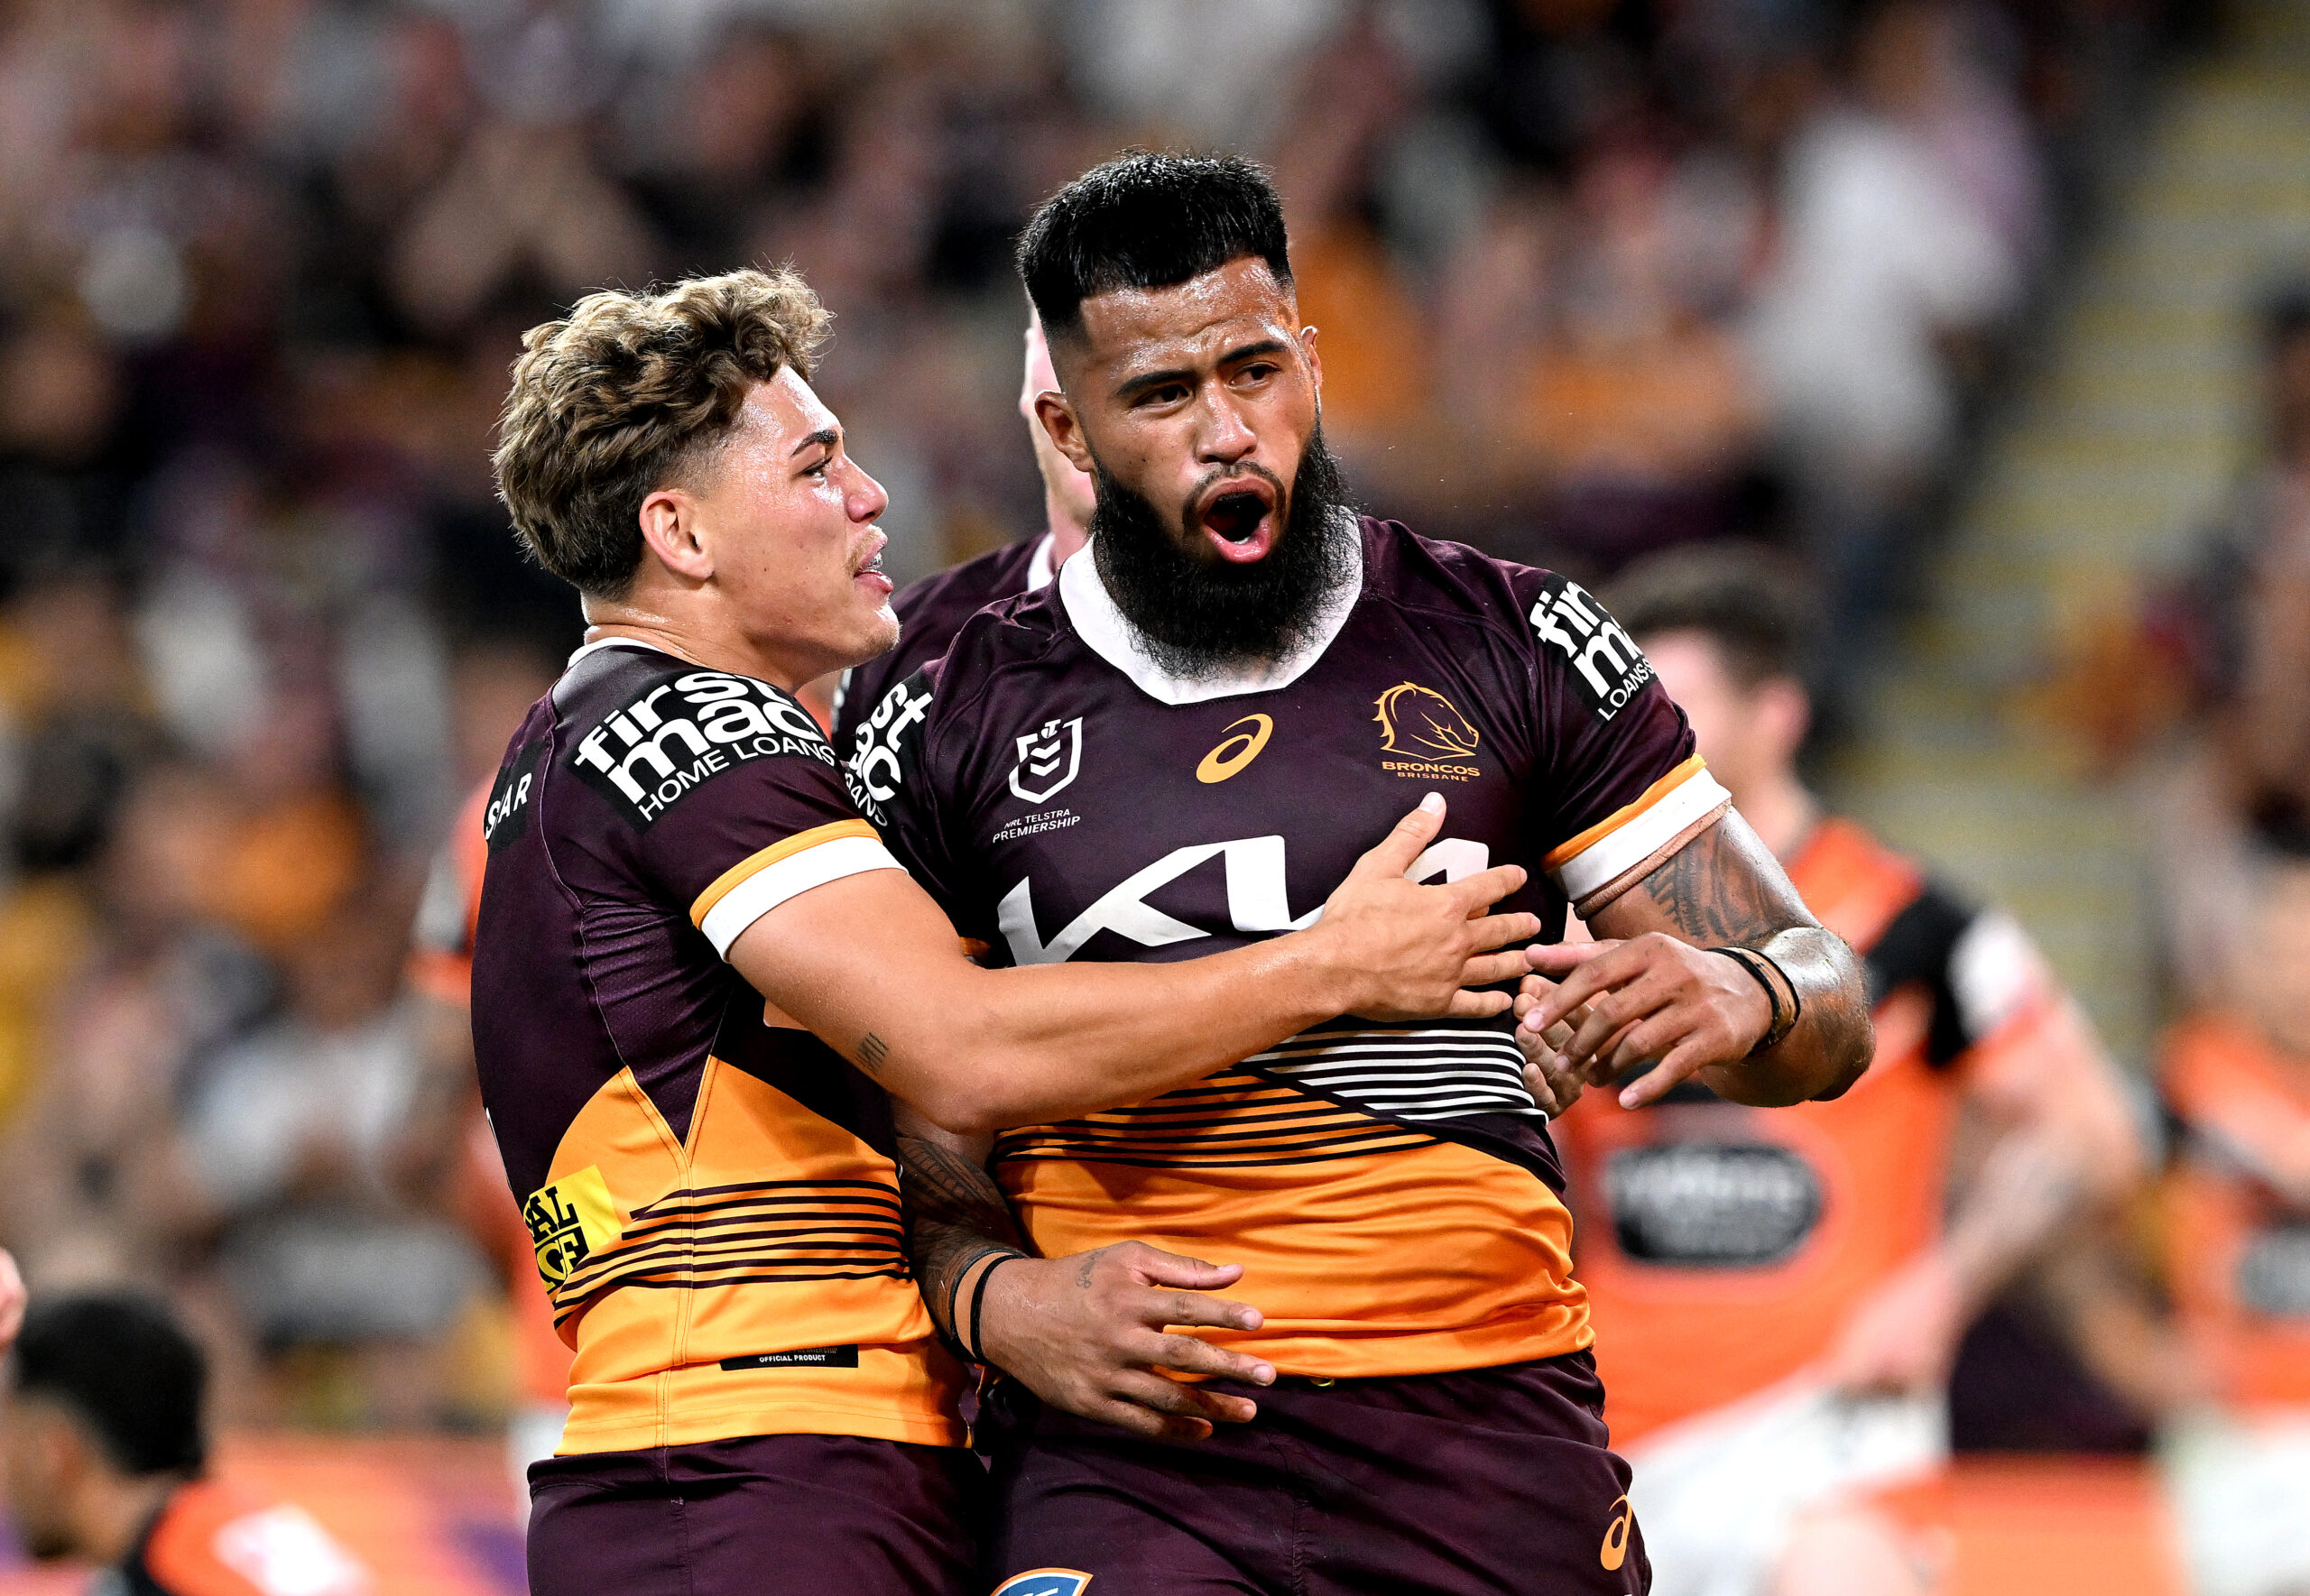 Four clubs confirmed for first NRL matches in Las Vegas NRL News